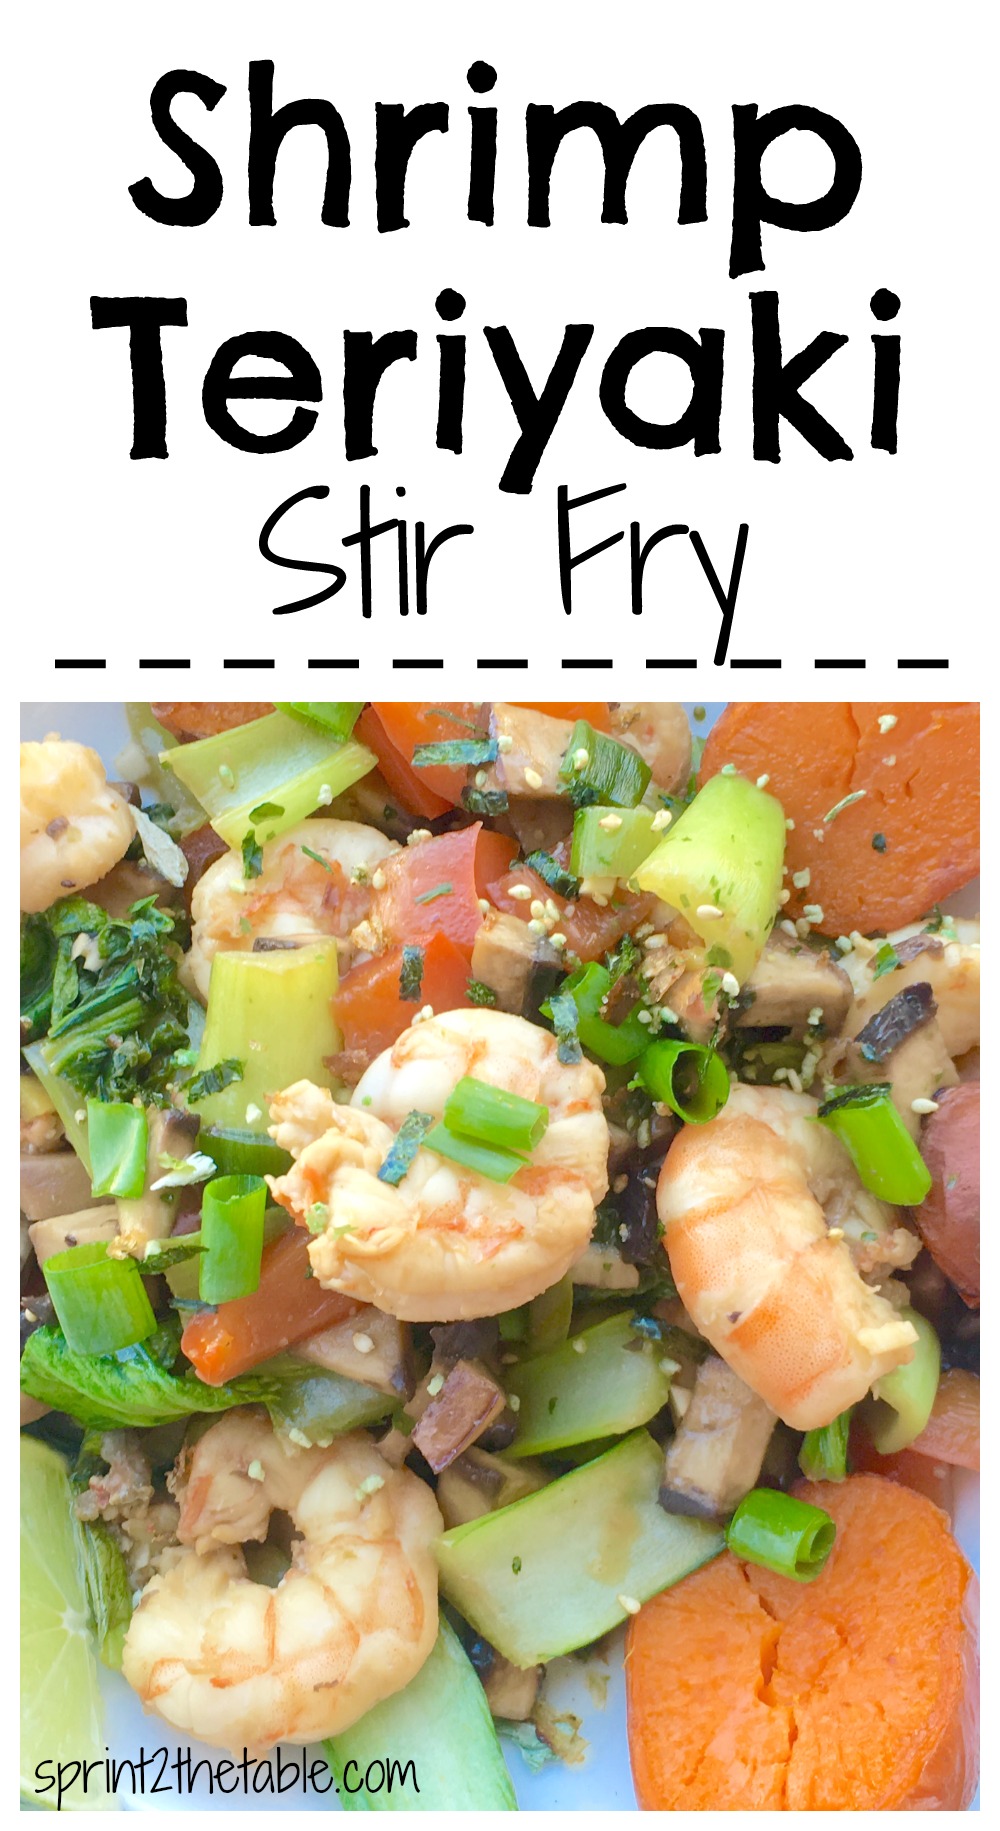 This yummy teriyaki stir fry recipe means you'll never need take out again. The marinade for the shrimp is just 3 ingredients!